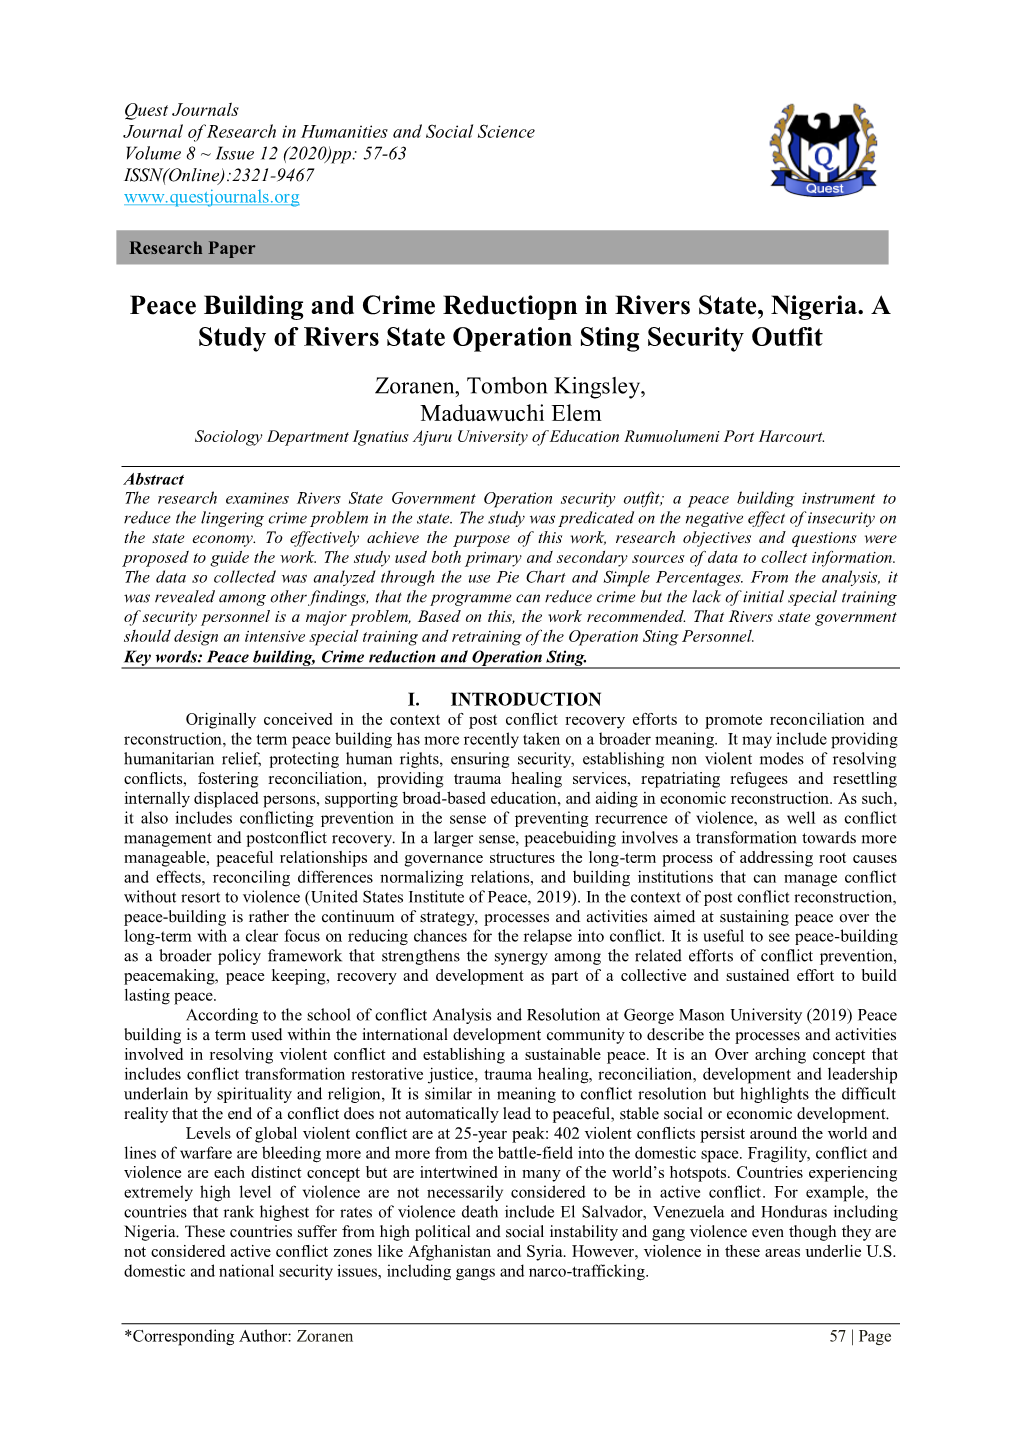 Peace Building and Crime Reductiopn in Rivers State, Nigeria. a Study of Rivers State Operation Sting Security Outfit